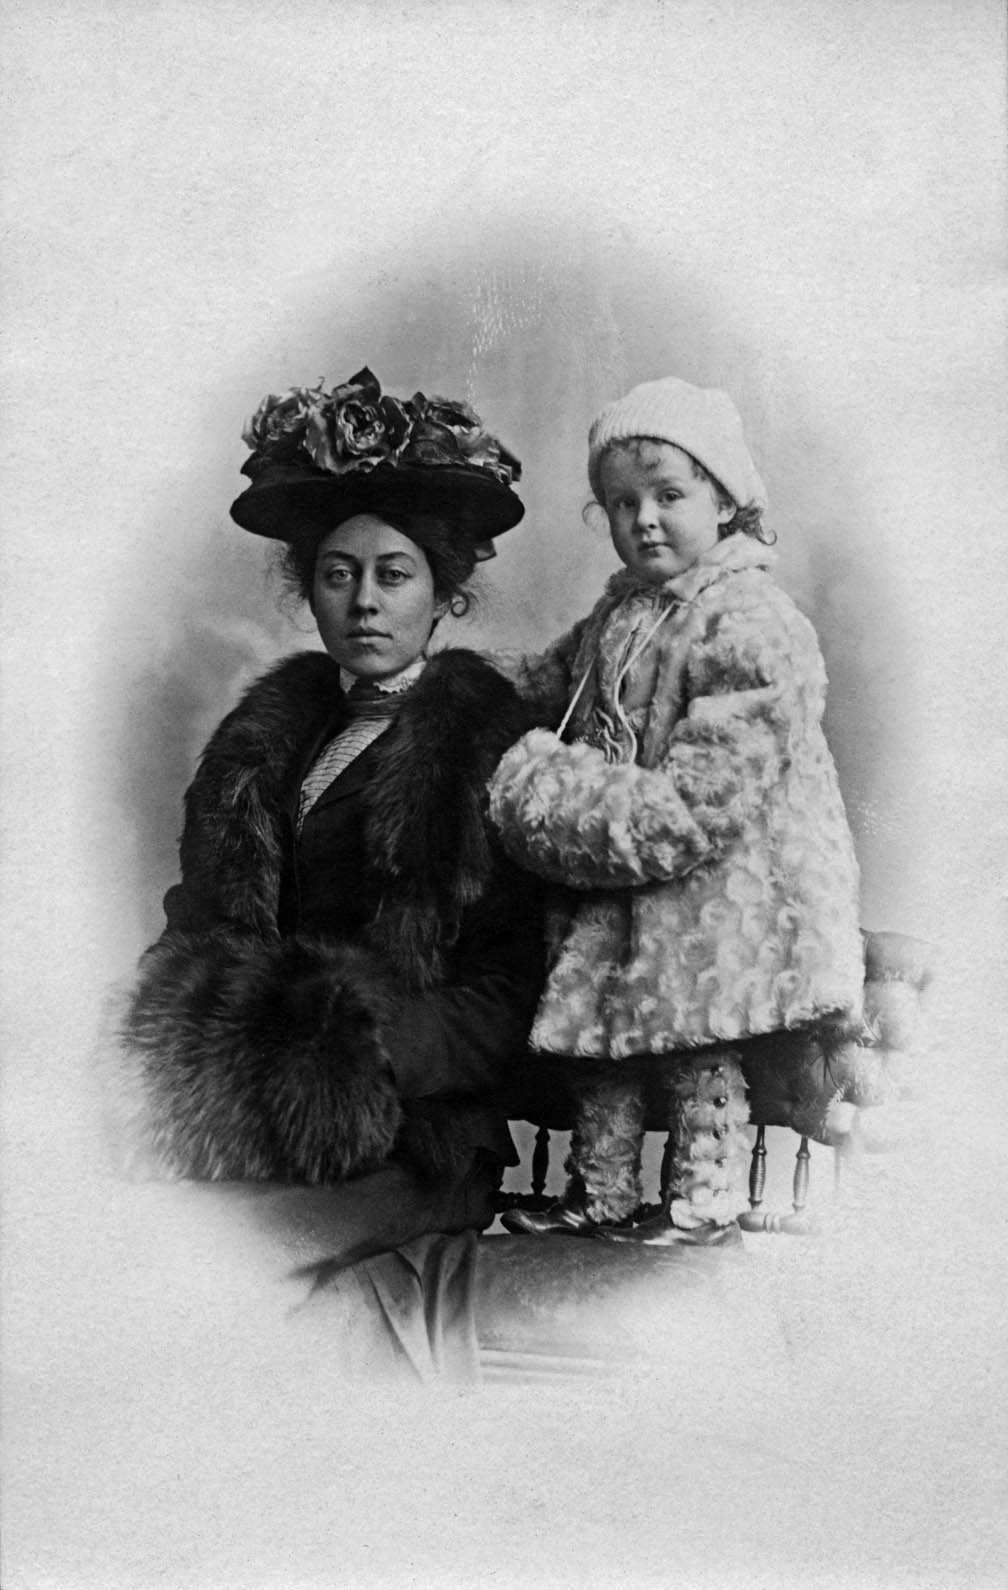 Anna Bush Hartsough and Ethyl L. Hartsough Hall in 1918. My mother's parents weren't wealthy - Grandpa was a Presbyterian minister. Yet Grandma Hartsough was in her Sunday best for this formal sitting with my mother in 1918. This portrait was, most likely, taken in Indianapolis.

Don Hall
Yreka CA